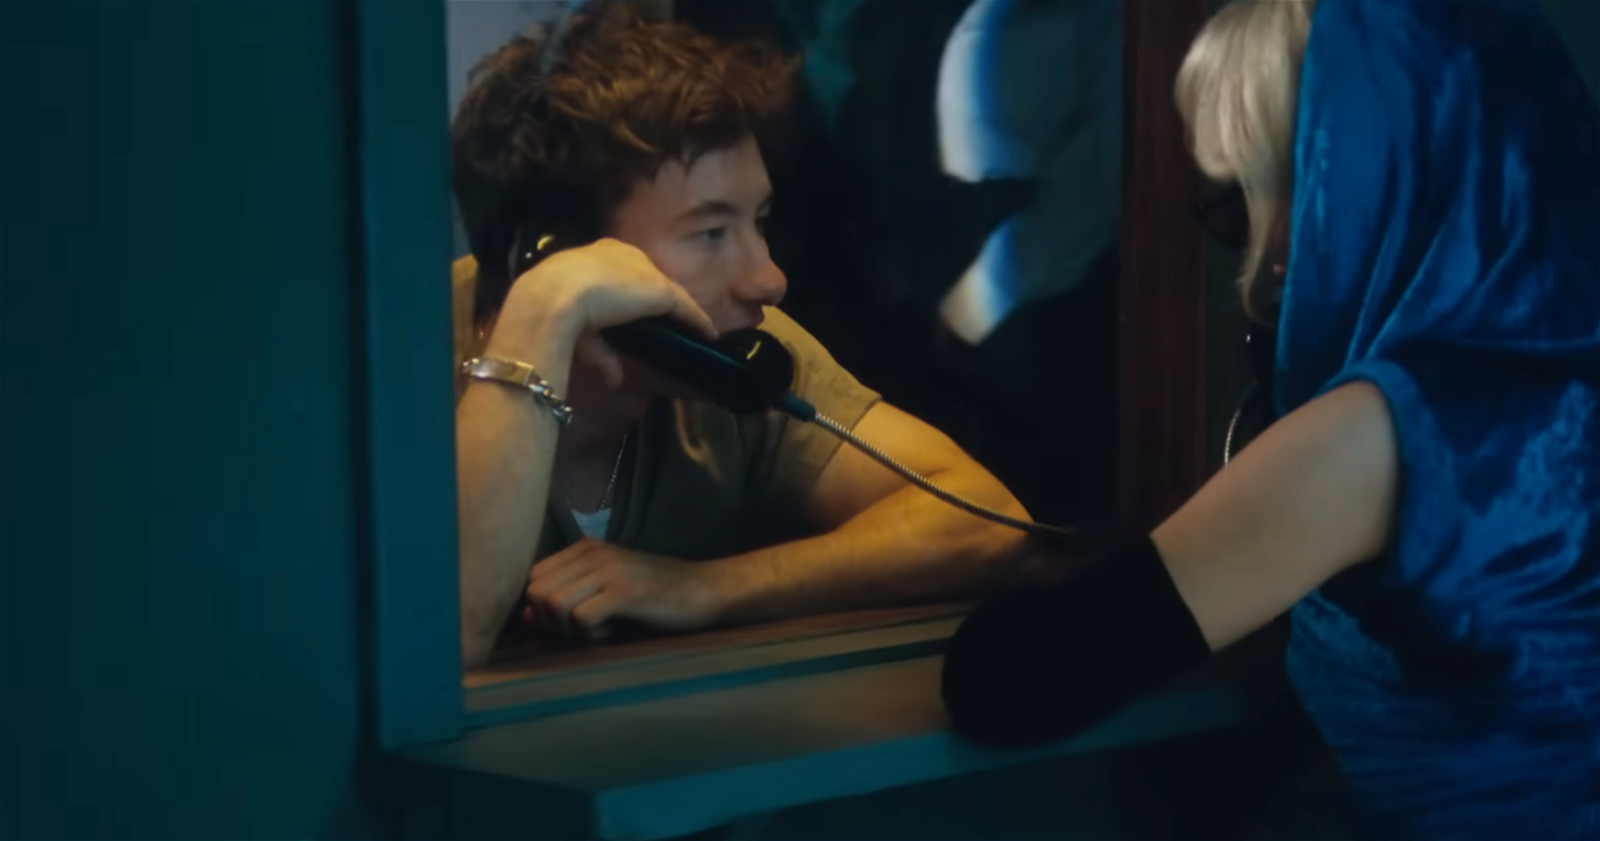 Barry Keoghan in the Please, Please, Please music video I Vevo